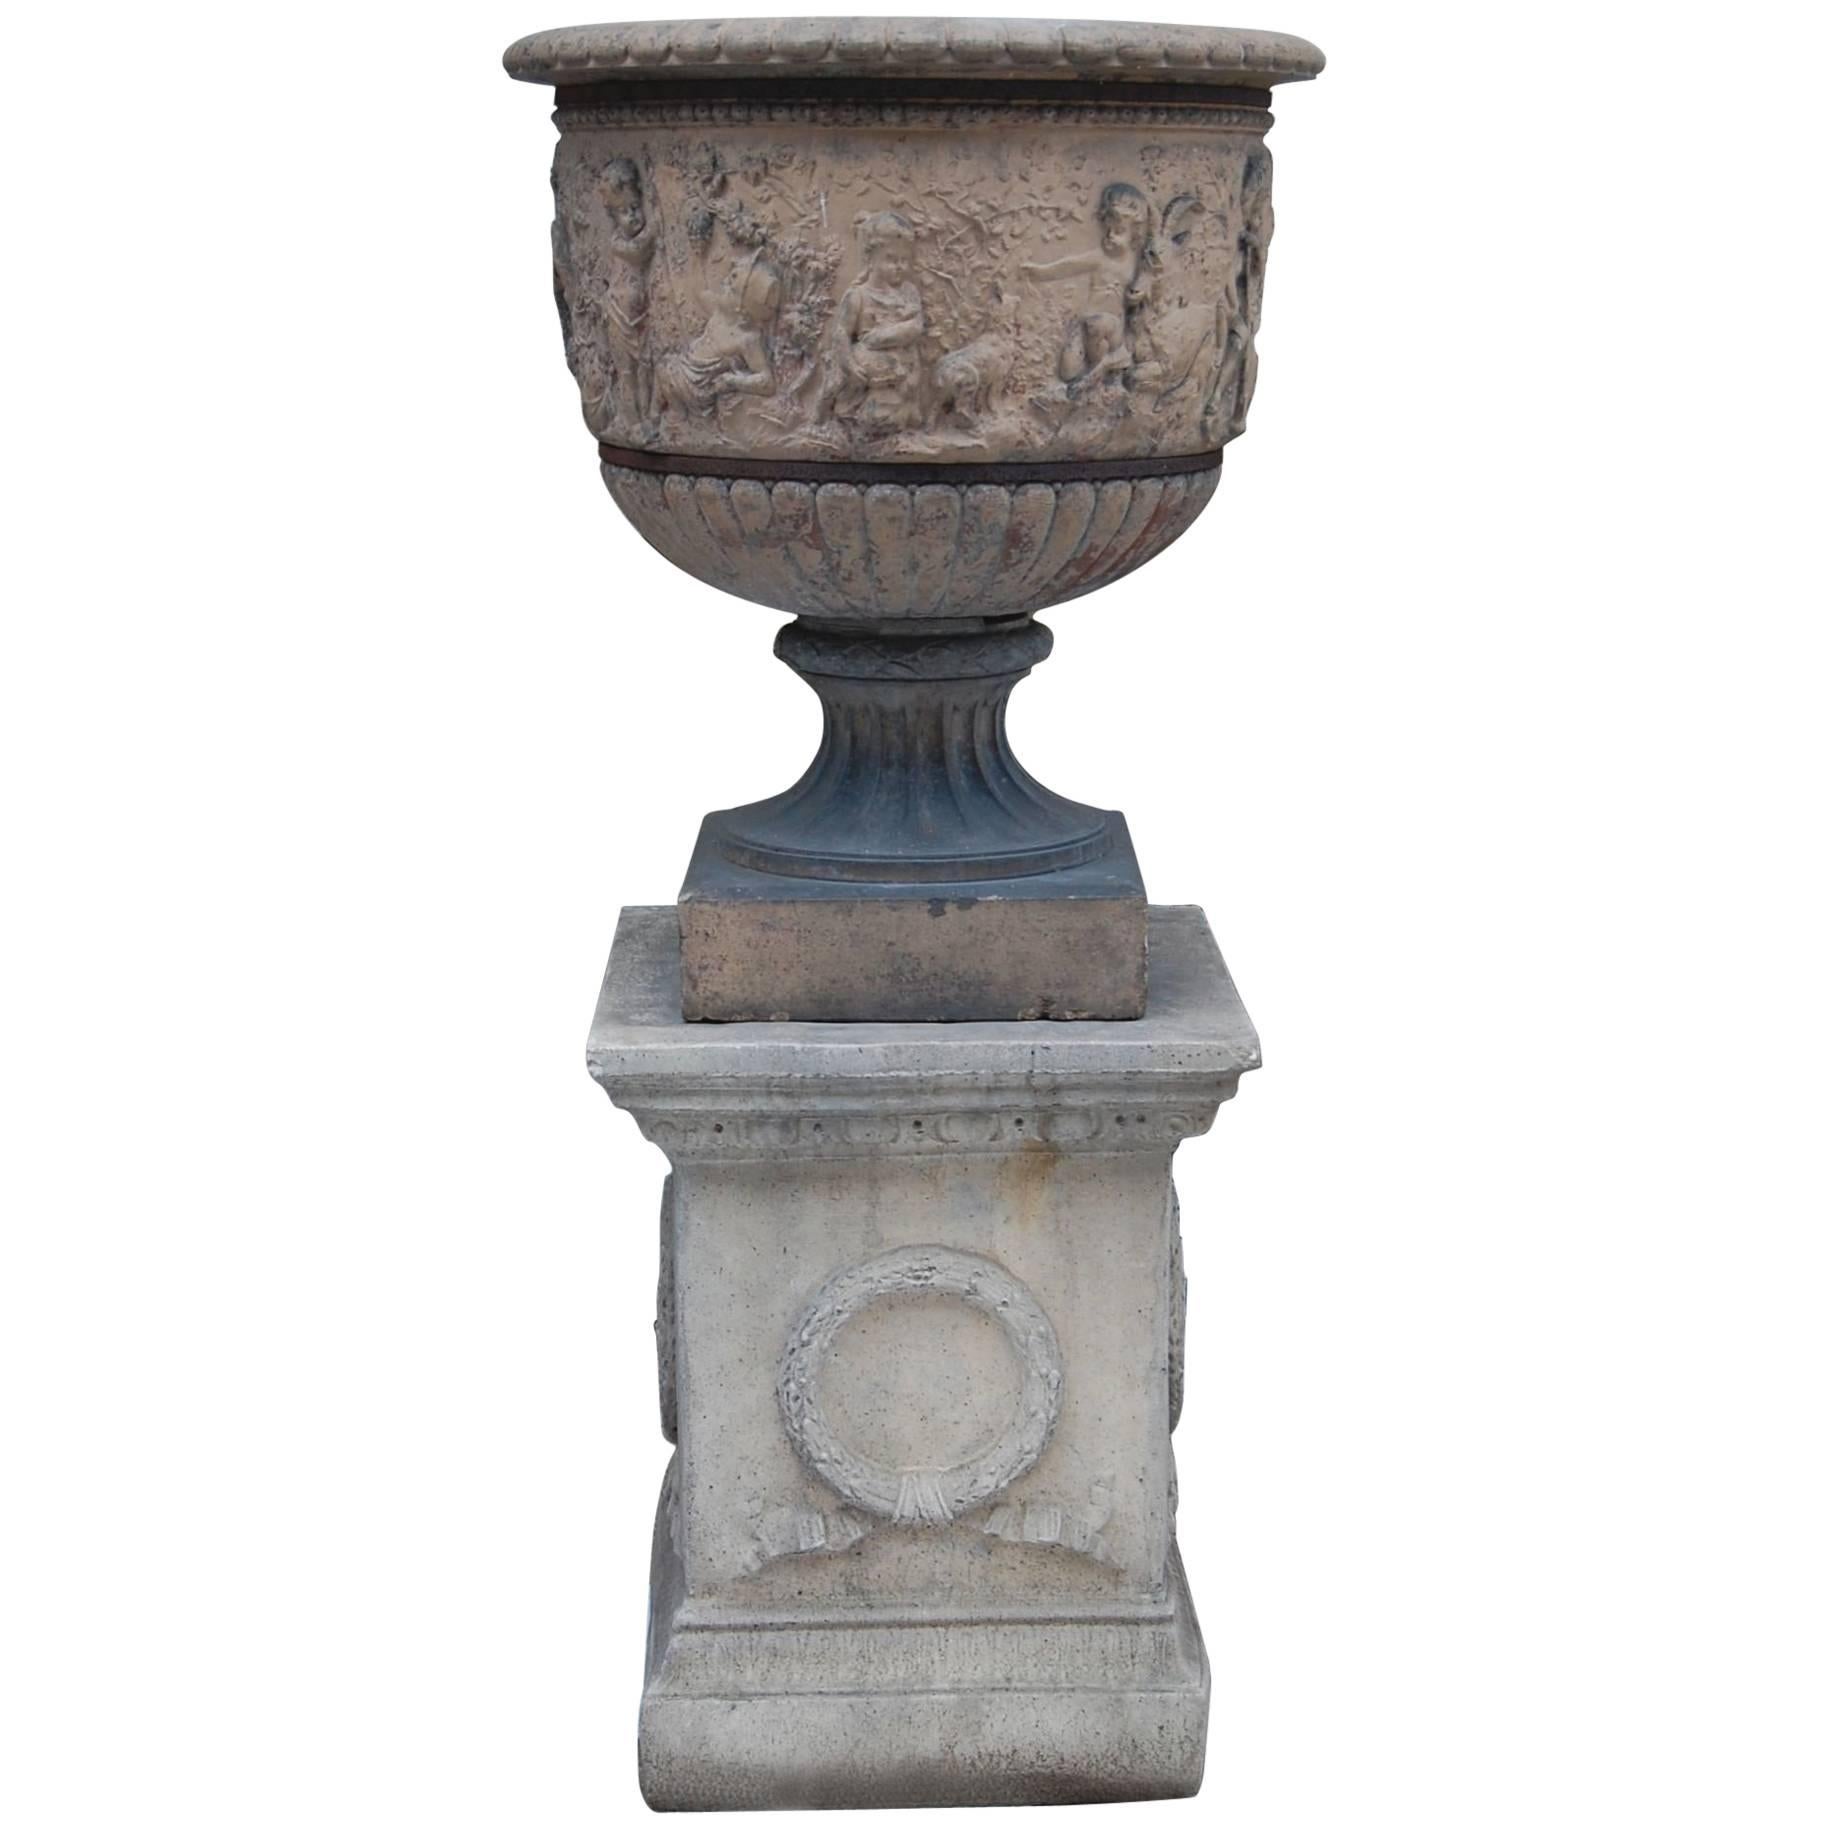 Large Classically Styled 19th Century Terracotta Urn on Modern Cement Plinth For Sale